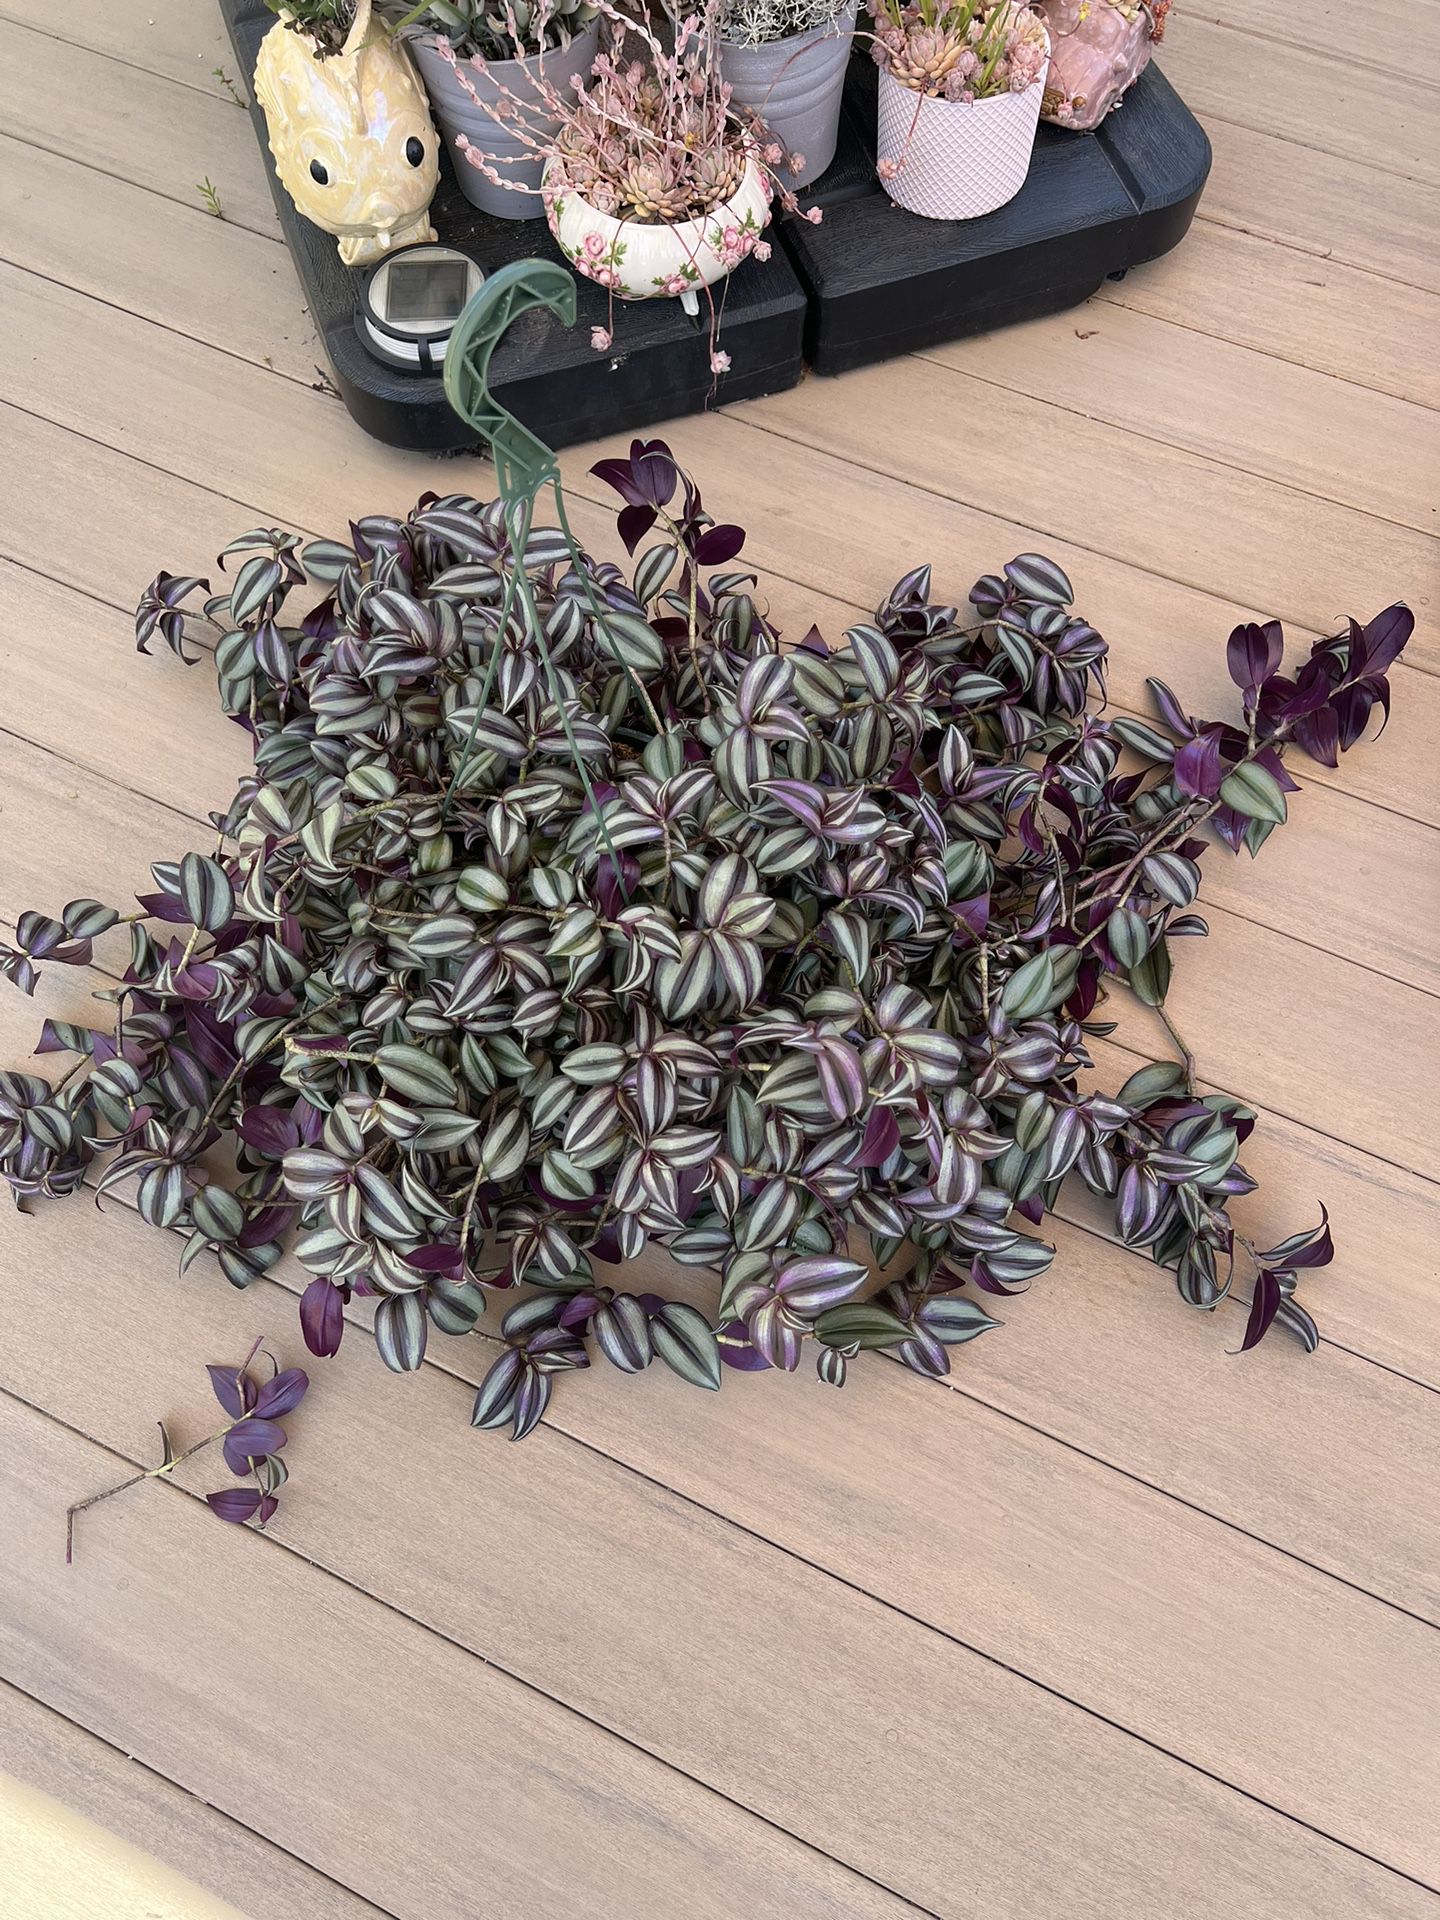 Huge Wandering Jewel Tradescantia Z Live Plant ,Comes in a 8” nursery pot ☑️ profile for more 🪴